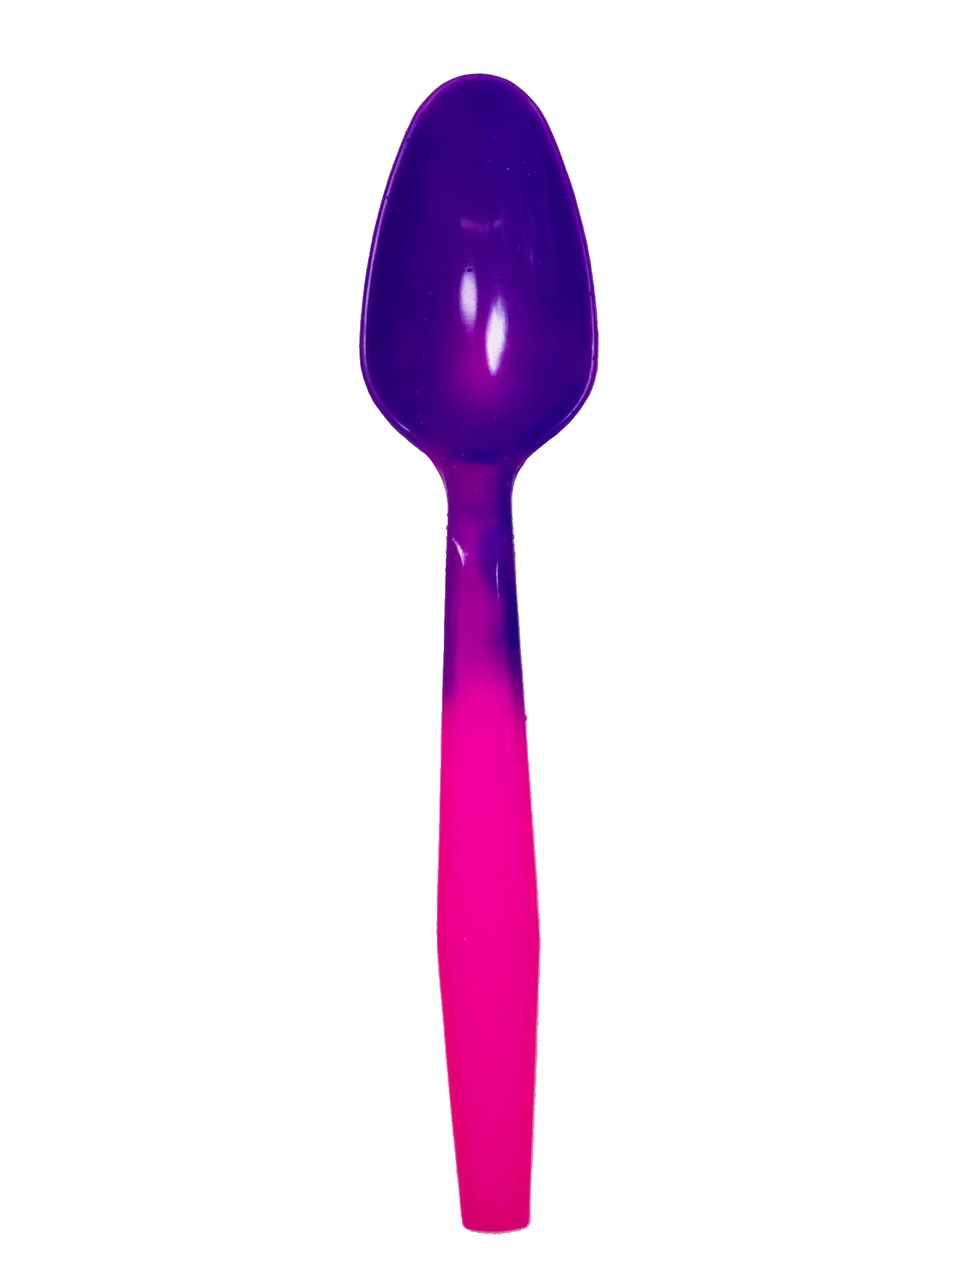 Color Changing Ice Cream Spoons - Pink to Purple